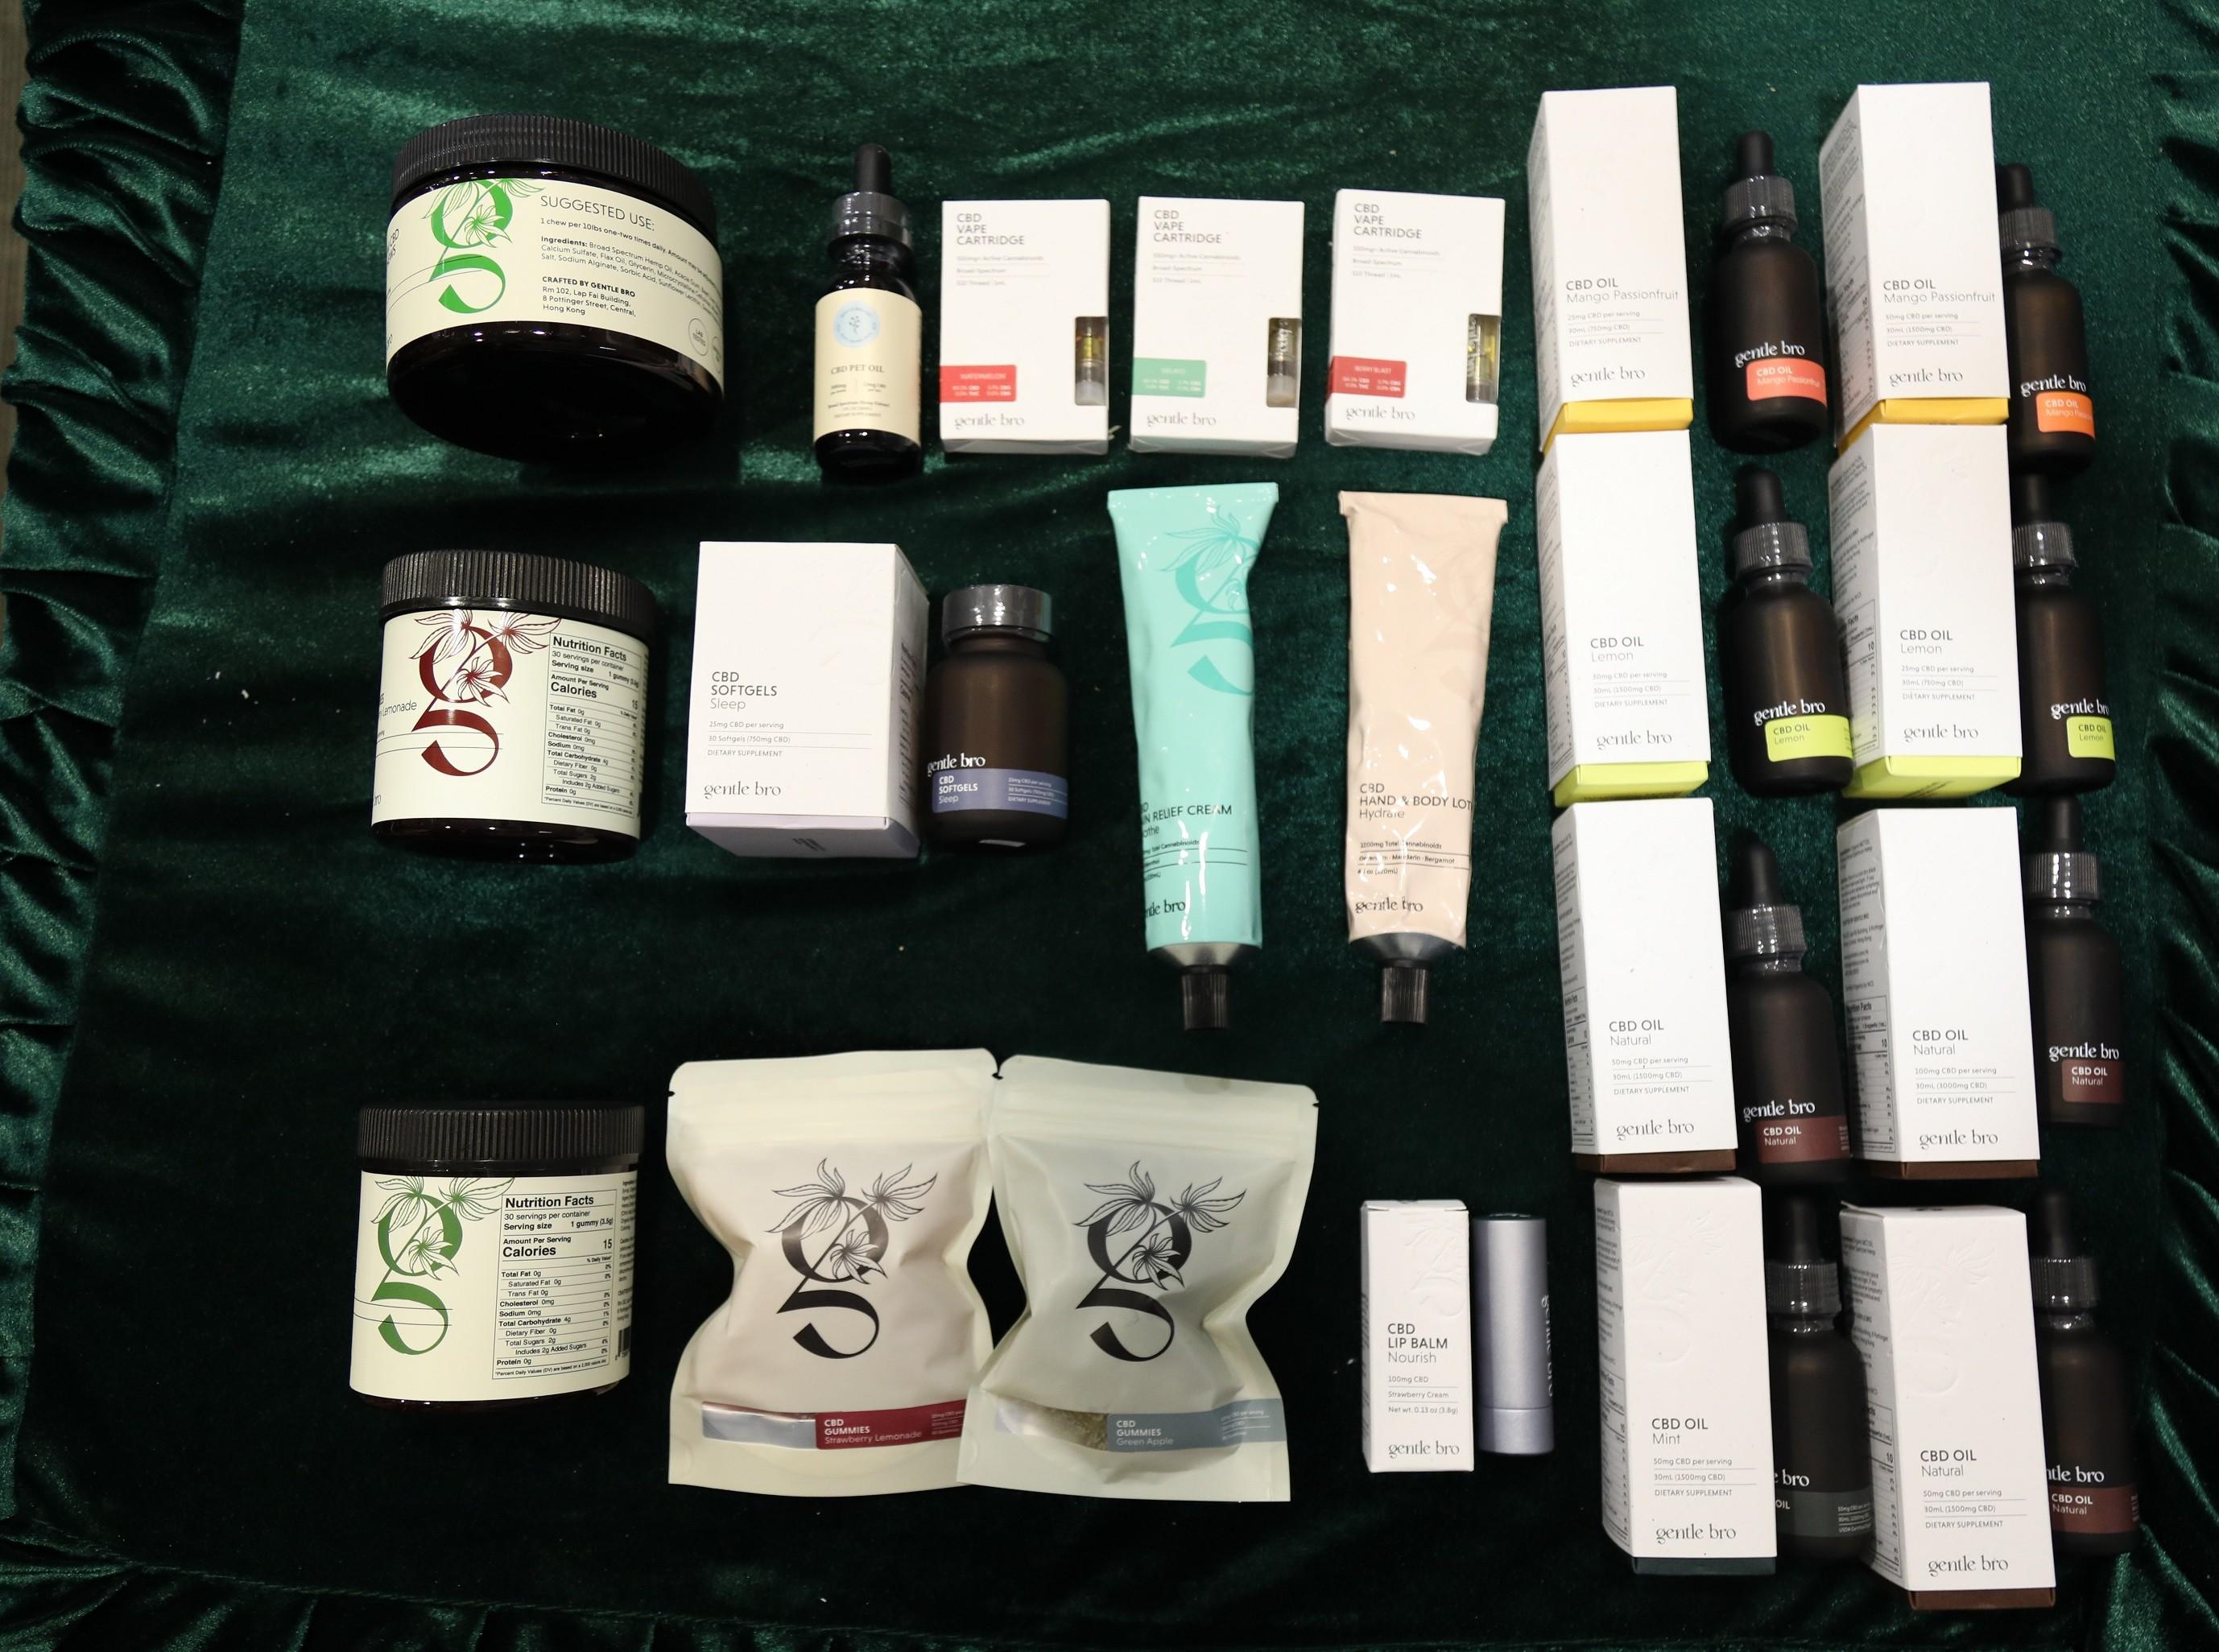 ​Hong Kong Customs has mounted a special operation codenamed "Wind Rider" since mid-January this year, targeting cannabidiol (CBD) products containing tetrahydro-cannabinol (THC) in the market. During the operation, Customs seized about 25 000 items of CBD products suspected of containing THC, including CBD oil, skin care products and pet treats, with a total estimated market value of about $14.6 million. Photo shows the CBD products of one of the brands in connection with the case.